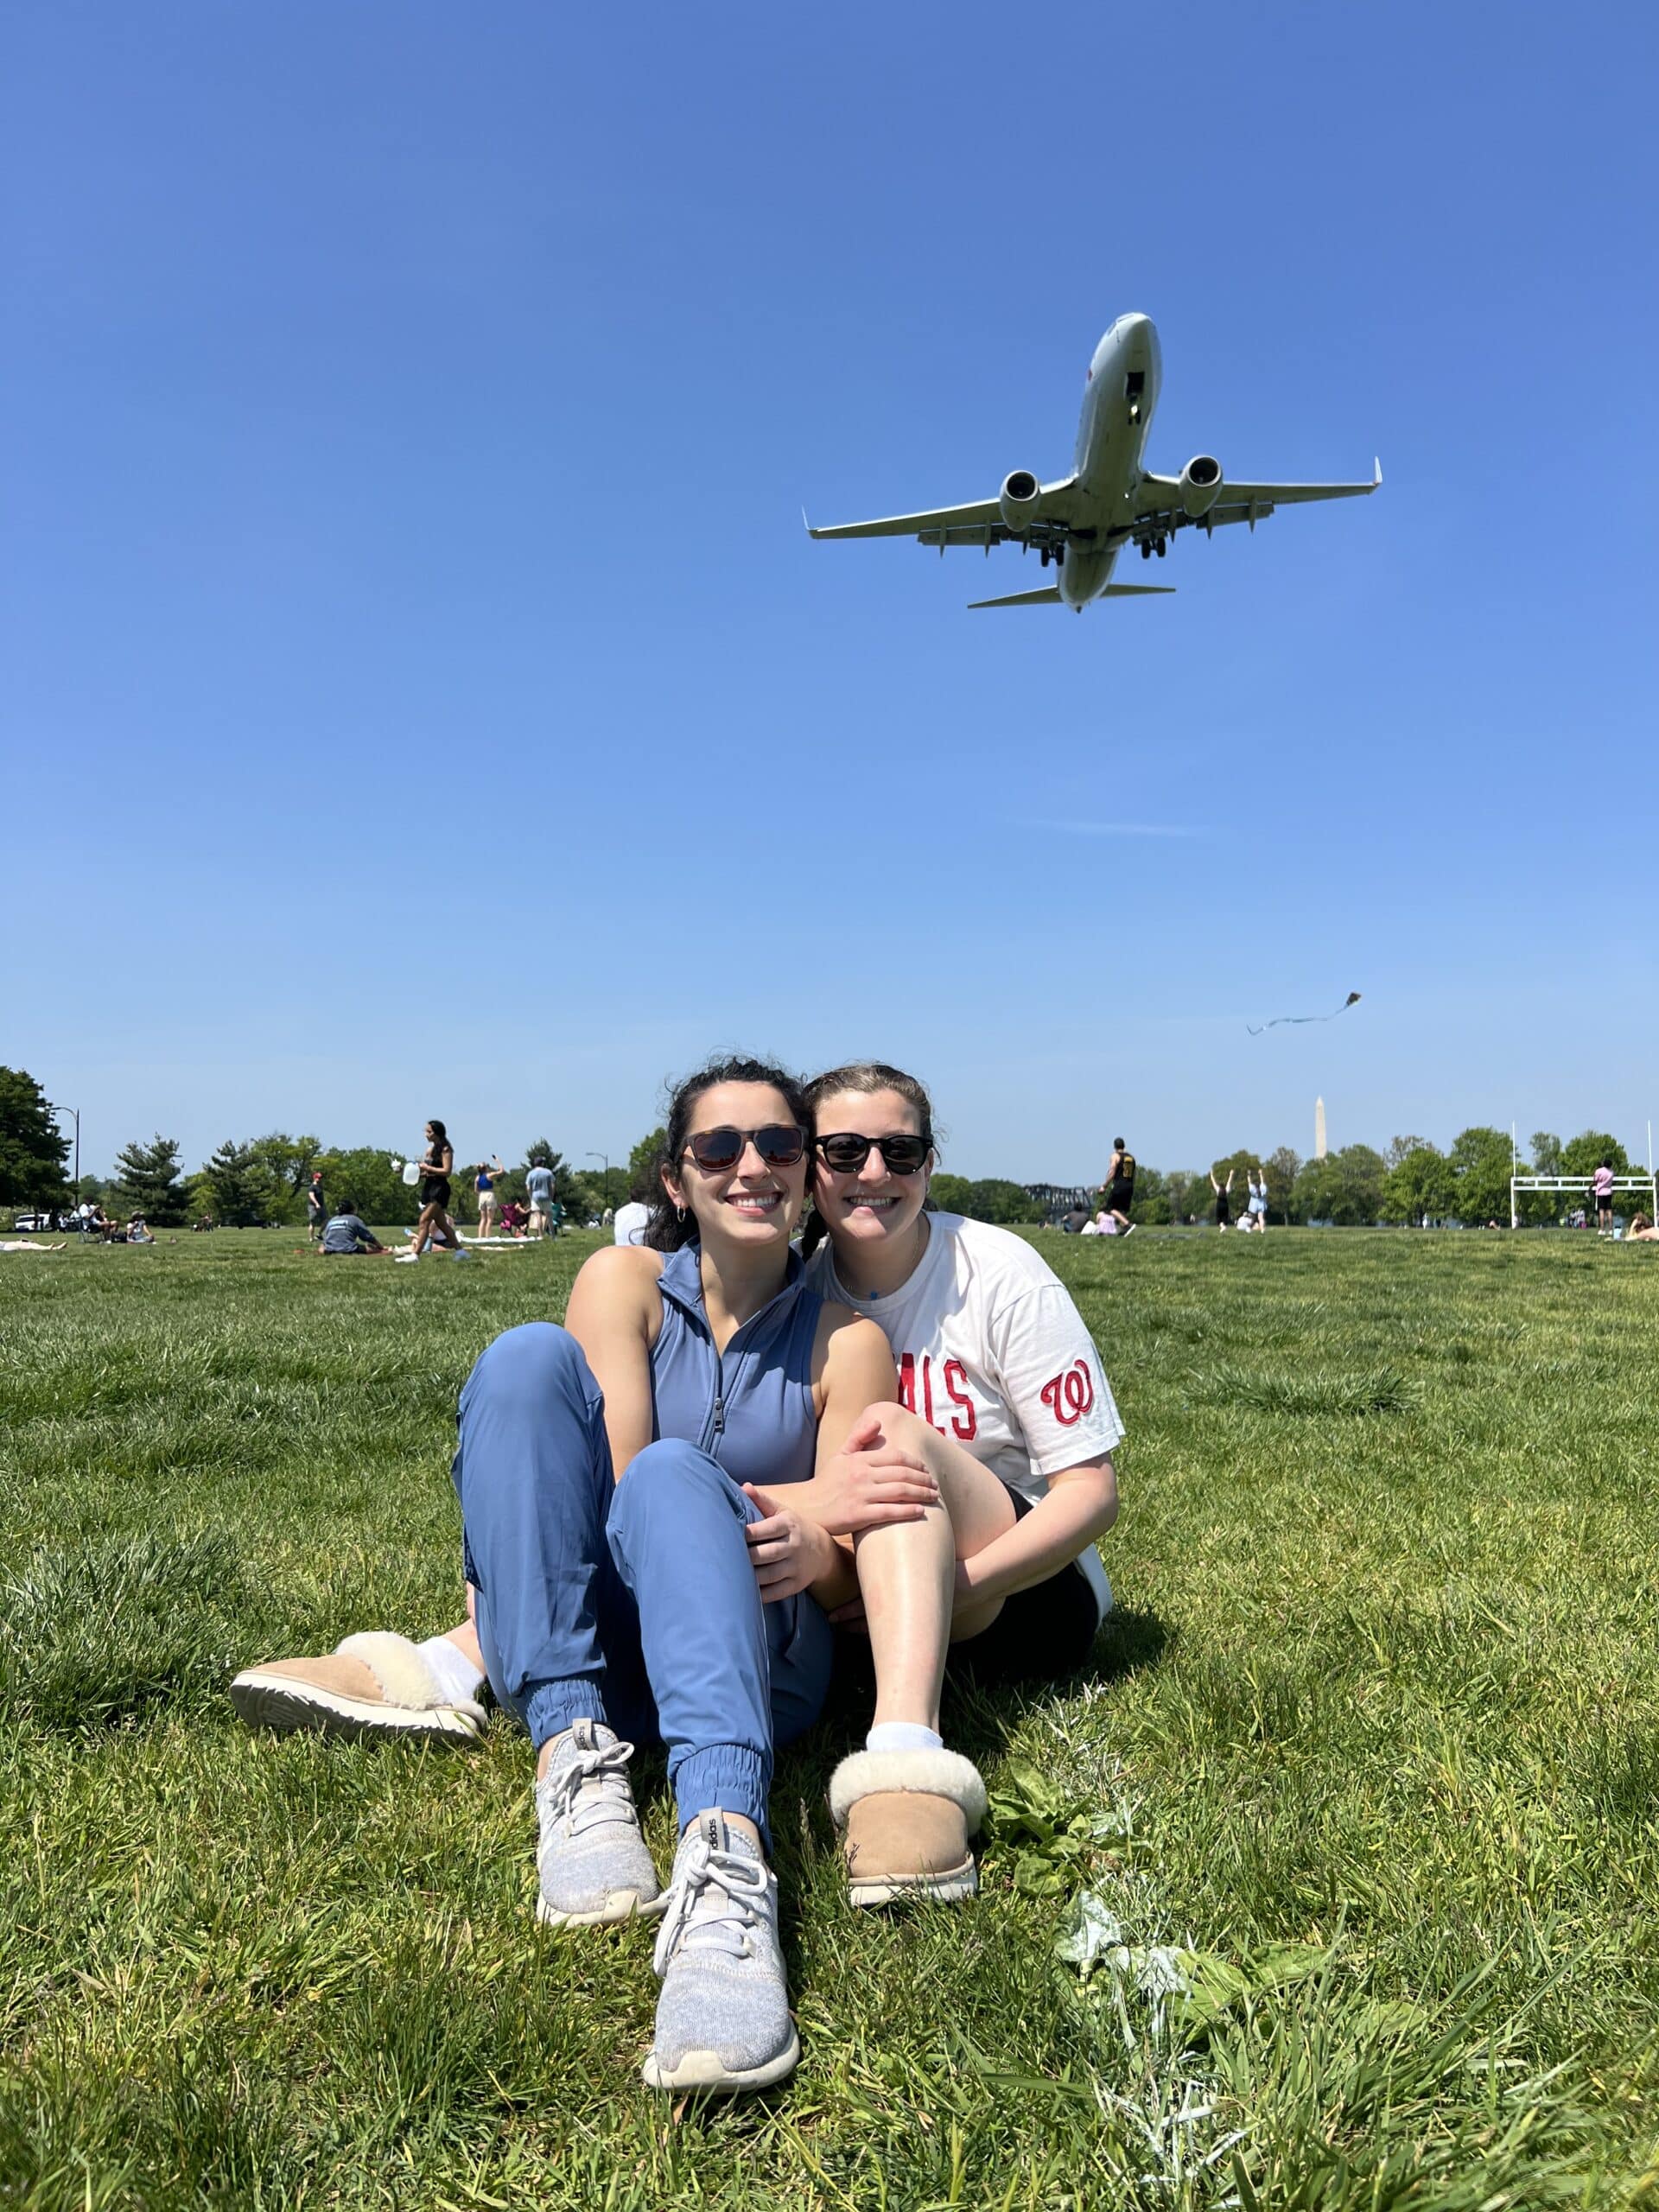 Renana and a friend watching planes take off.